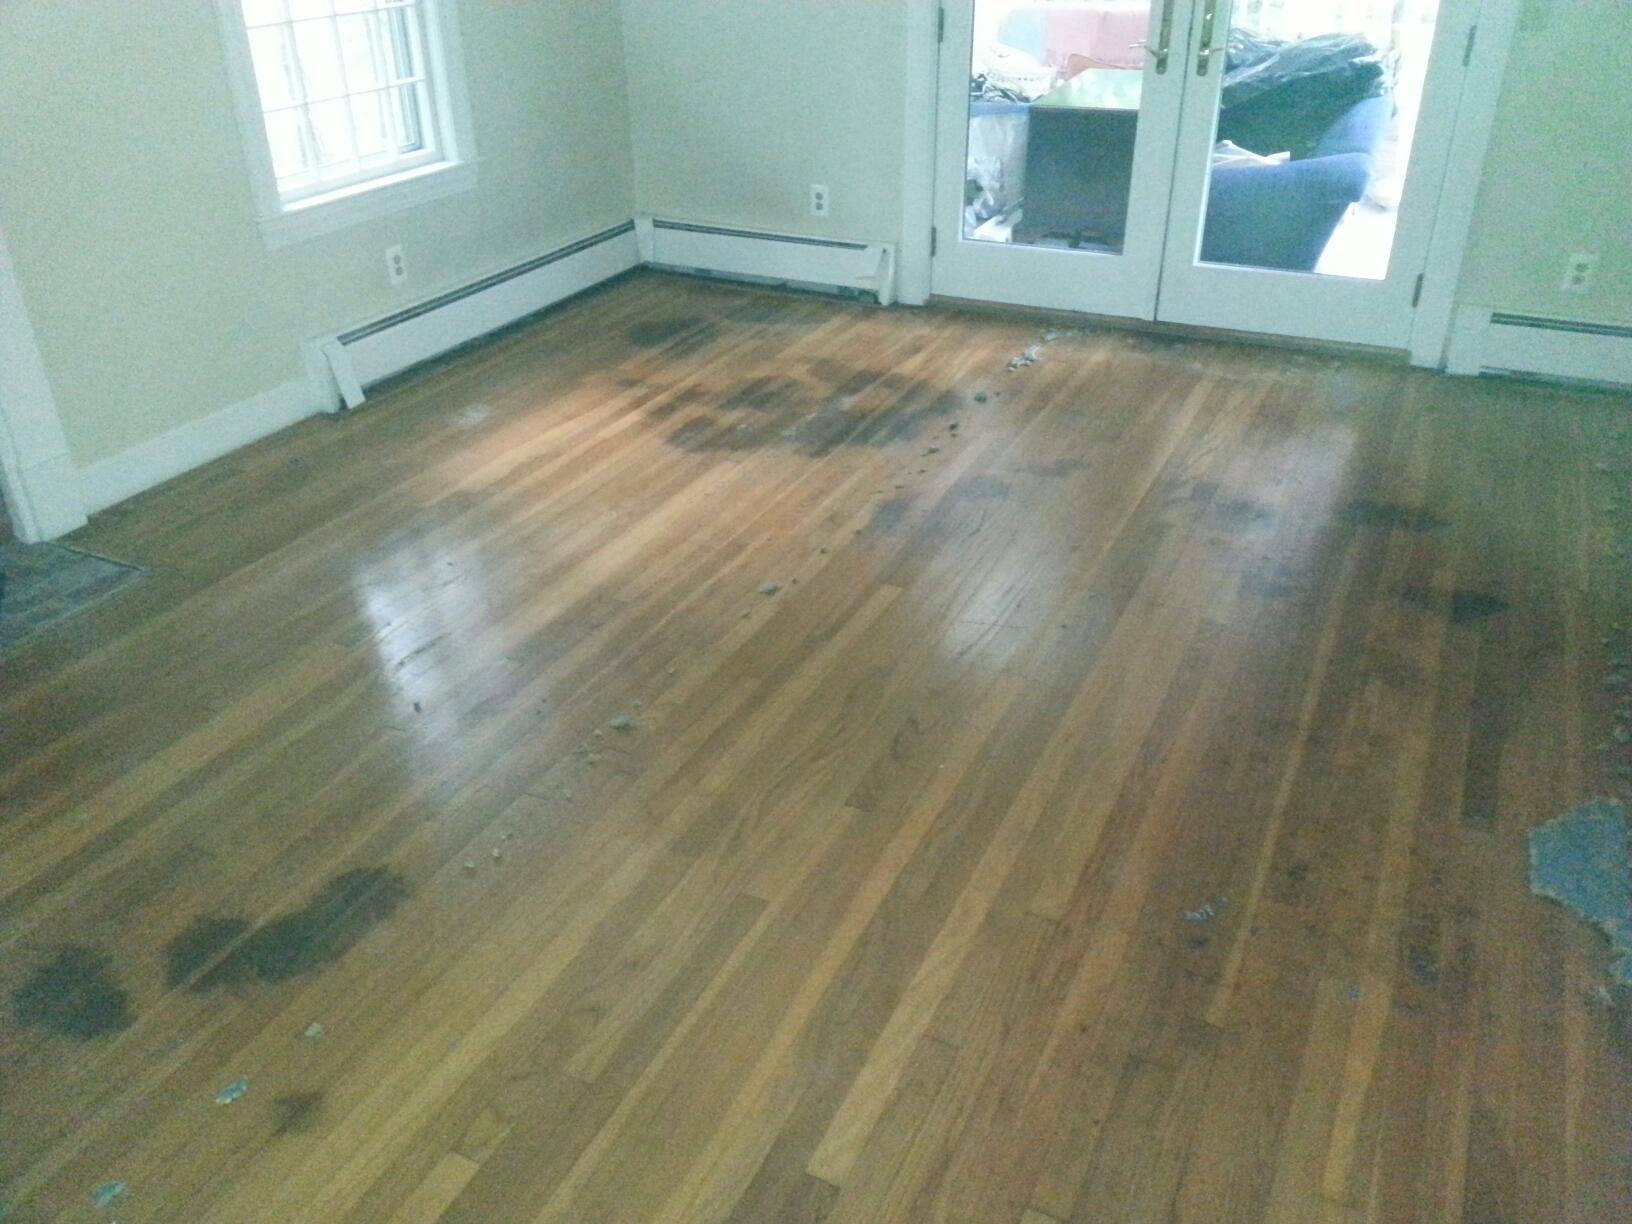 Repairing Pet Stained Hardwood Floors In Acton Ma Central Mass